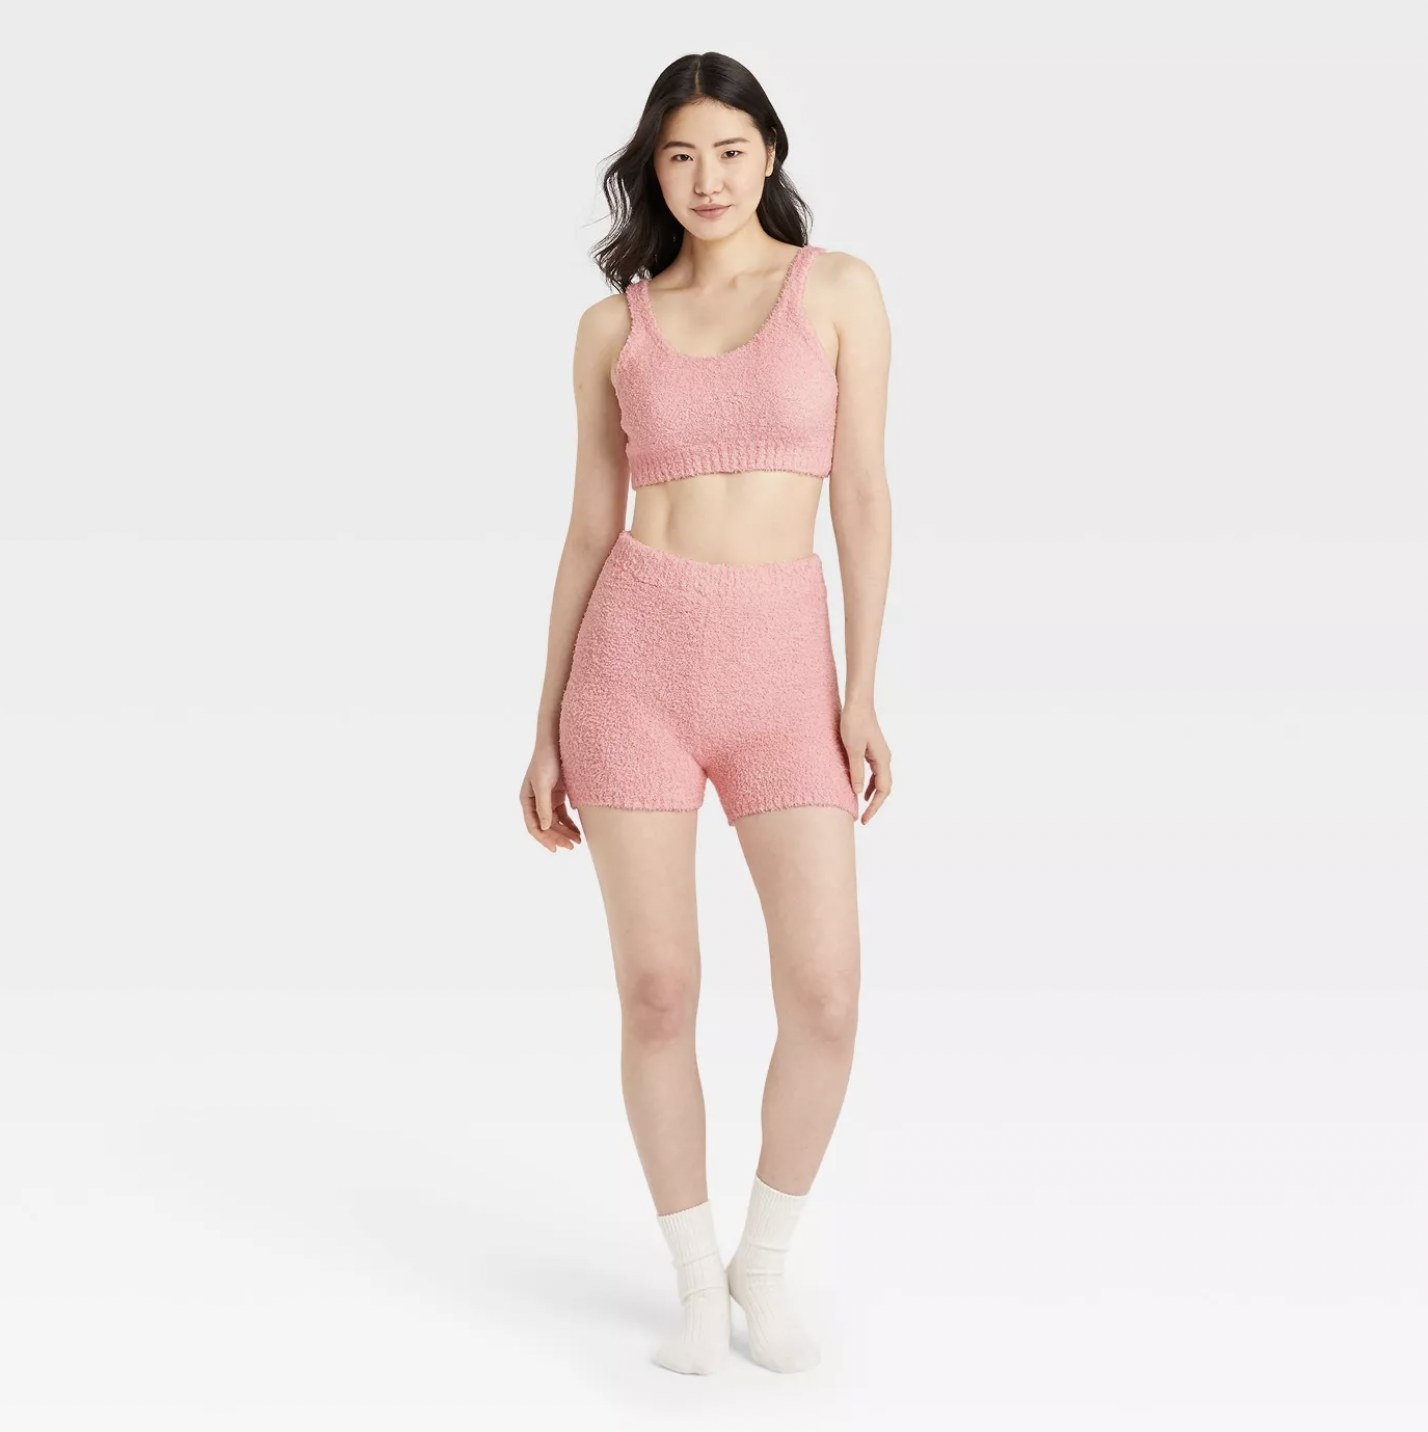 Model wearing the pink lounge shorts with matching crop top